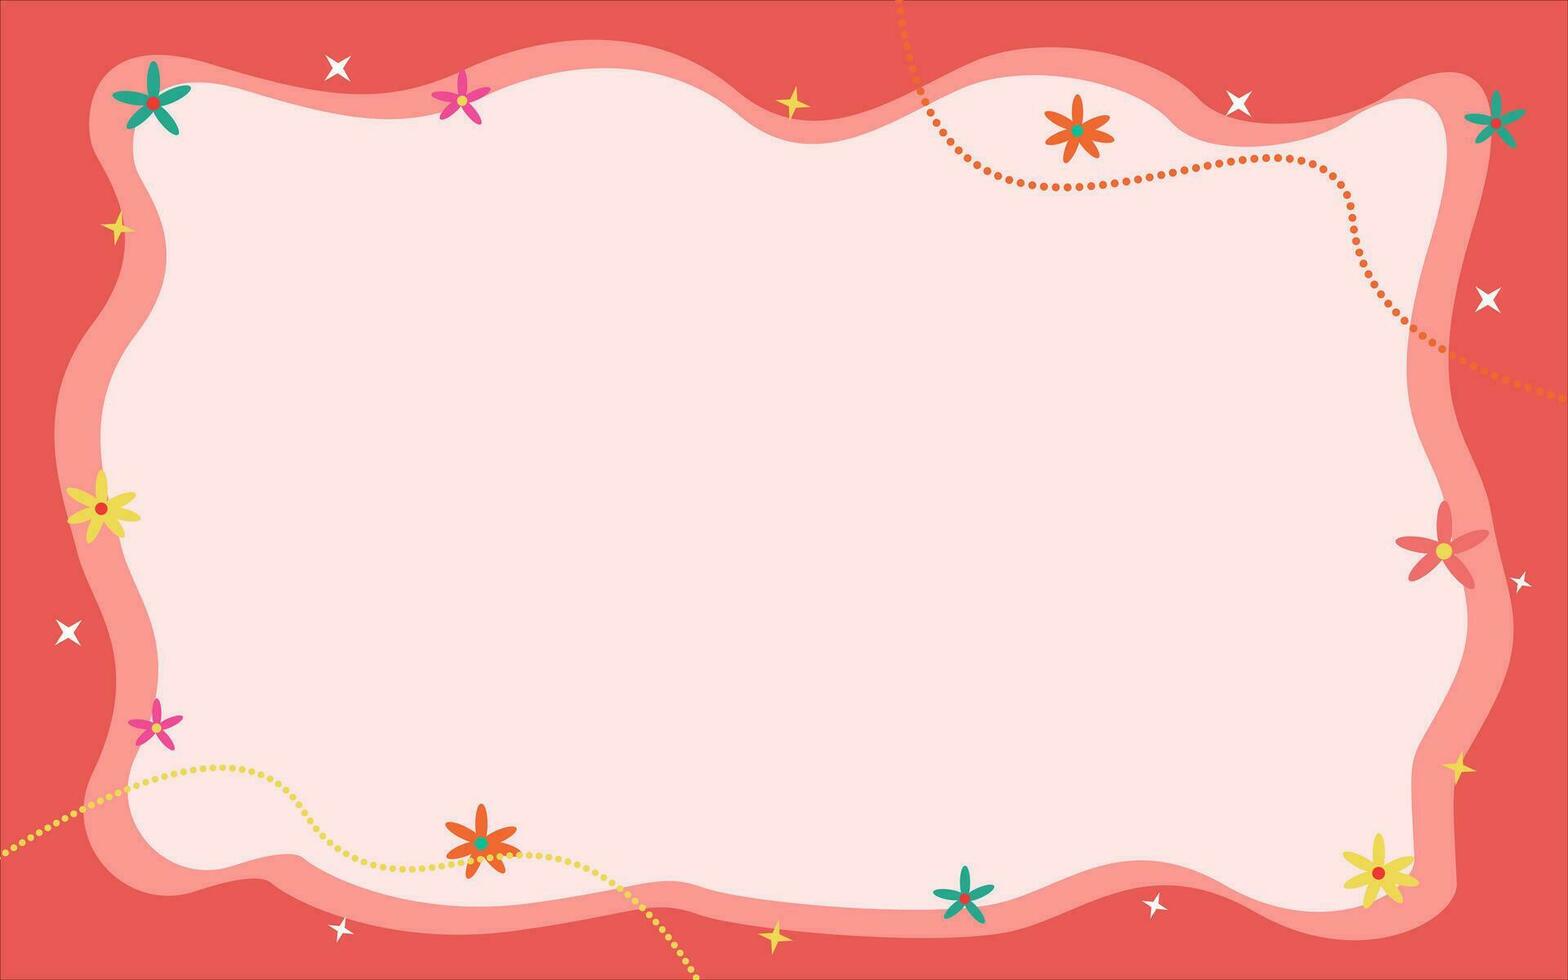 Carnival background in peach color vector